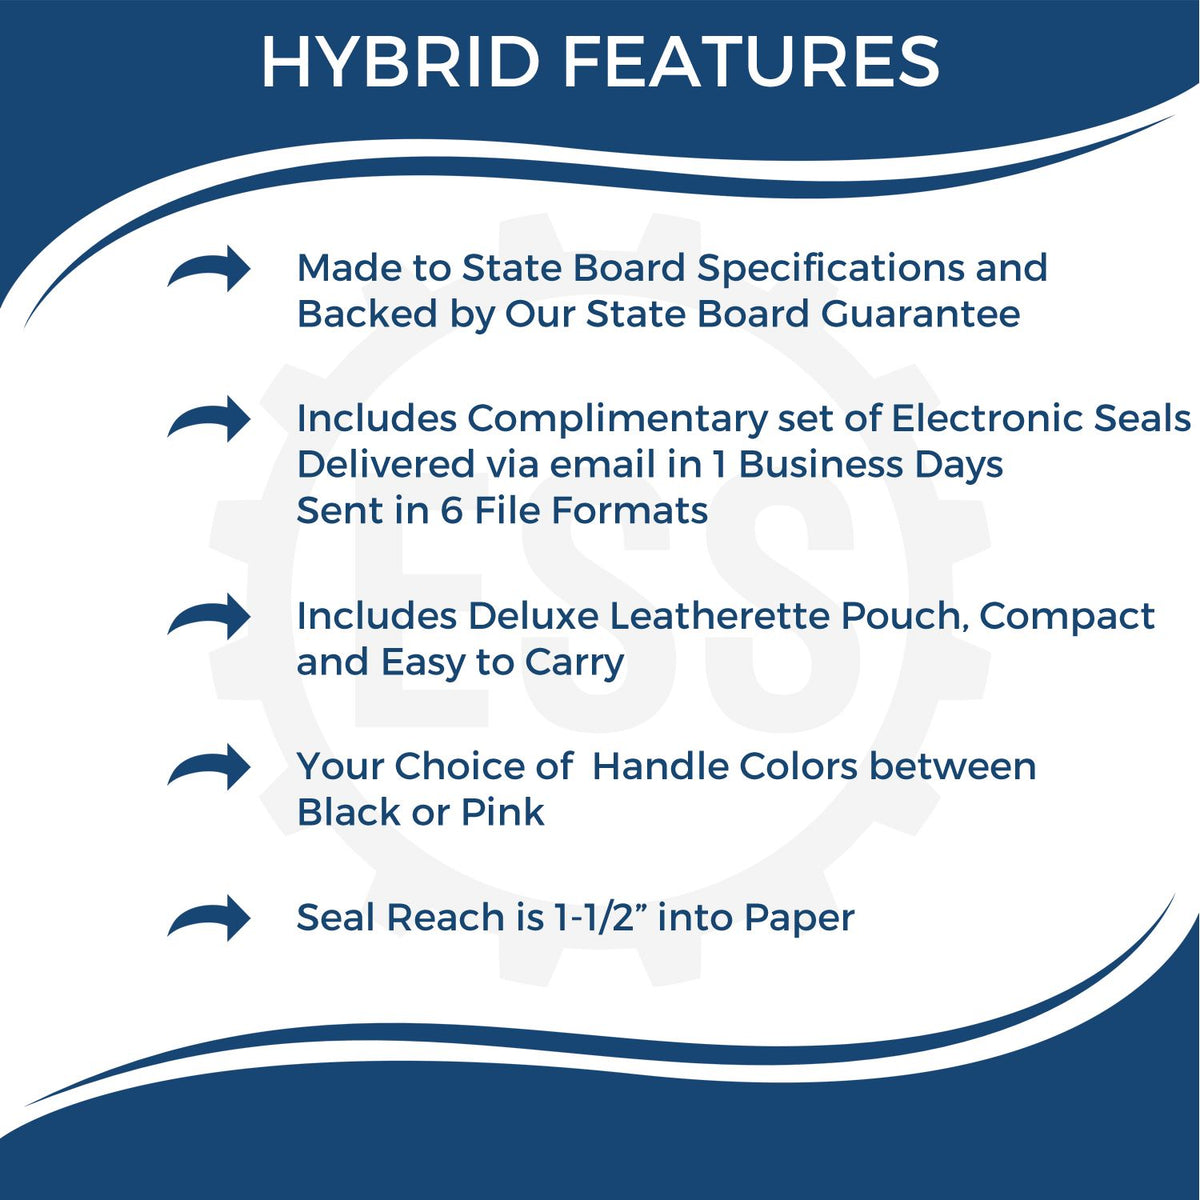 A picture of an infographic highlighting the selling points for the Hybrid Georgia Engineer Seal